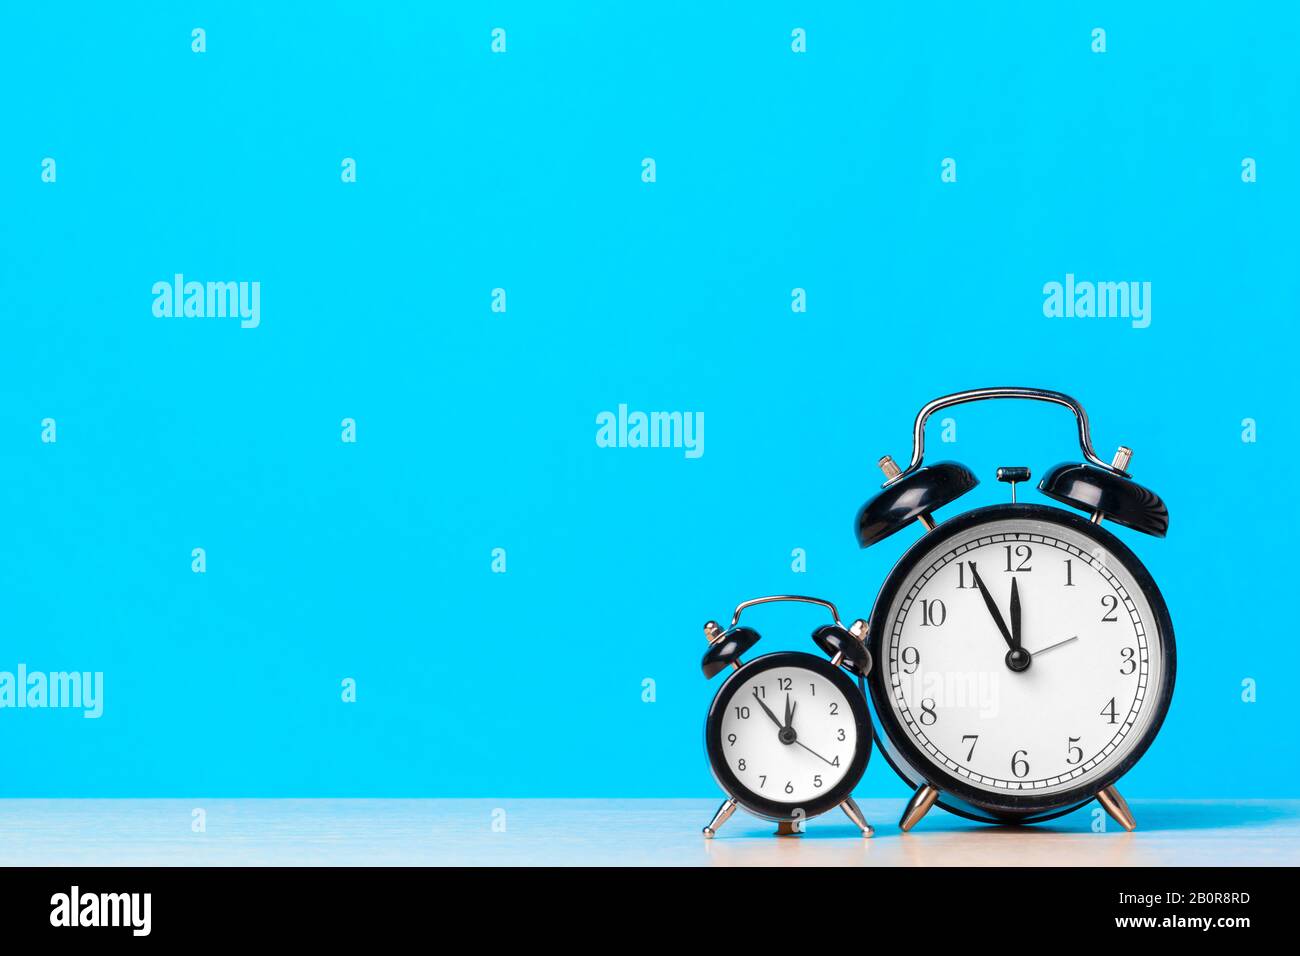 Different alarm clocks on table. Time change concept Stock Photo